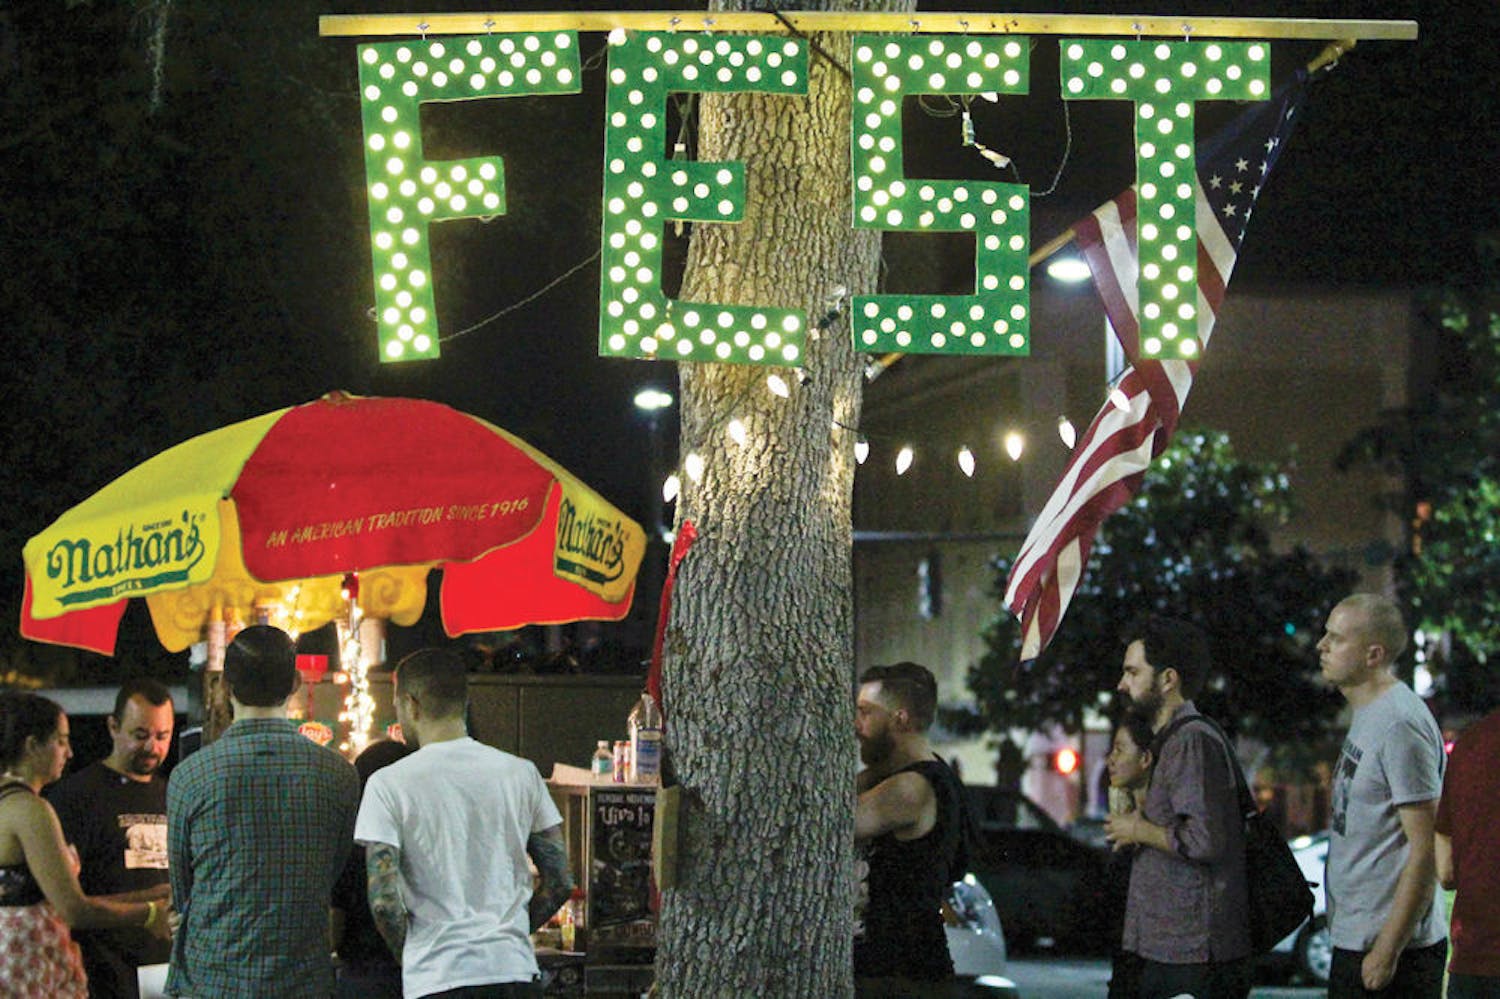 Festival-goers crowd a hot dog stand during FEST 14 on Oct. 31, 2015.